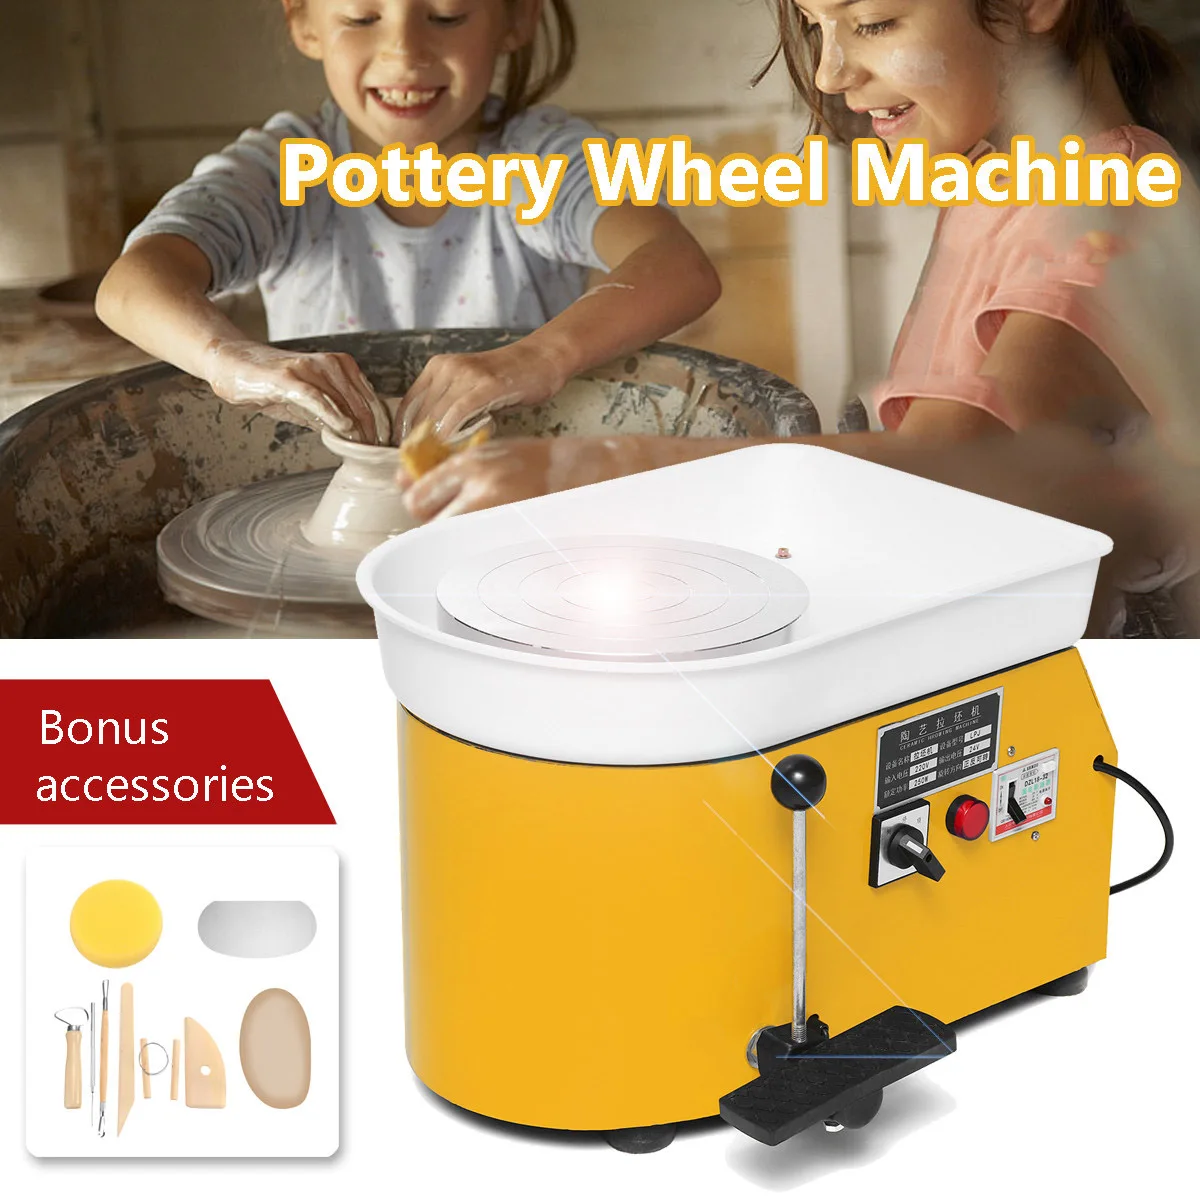 

3 Colors Pottery Forming Machine 110V/220V Electric Pottery Wheel DIY Clay Tool with Tray For Ceramic Work Art Craft 250W/350W